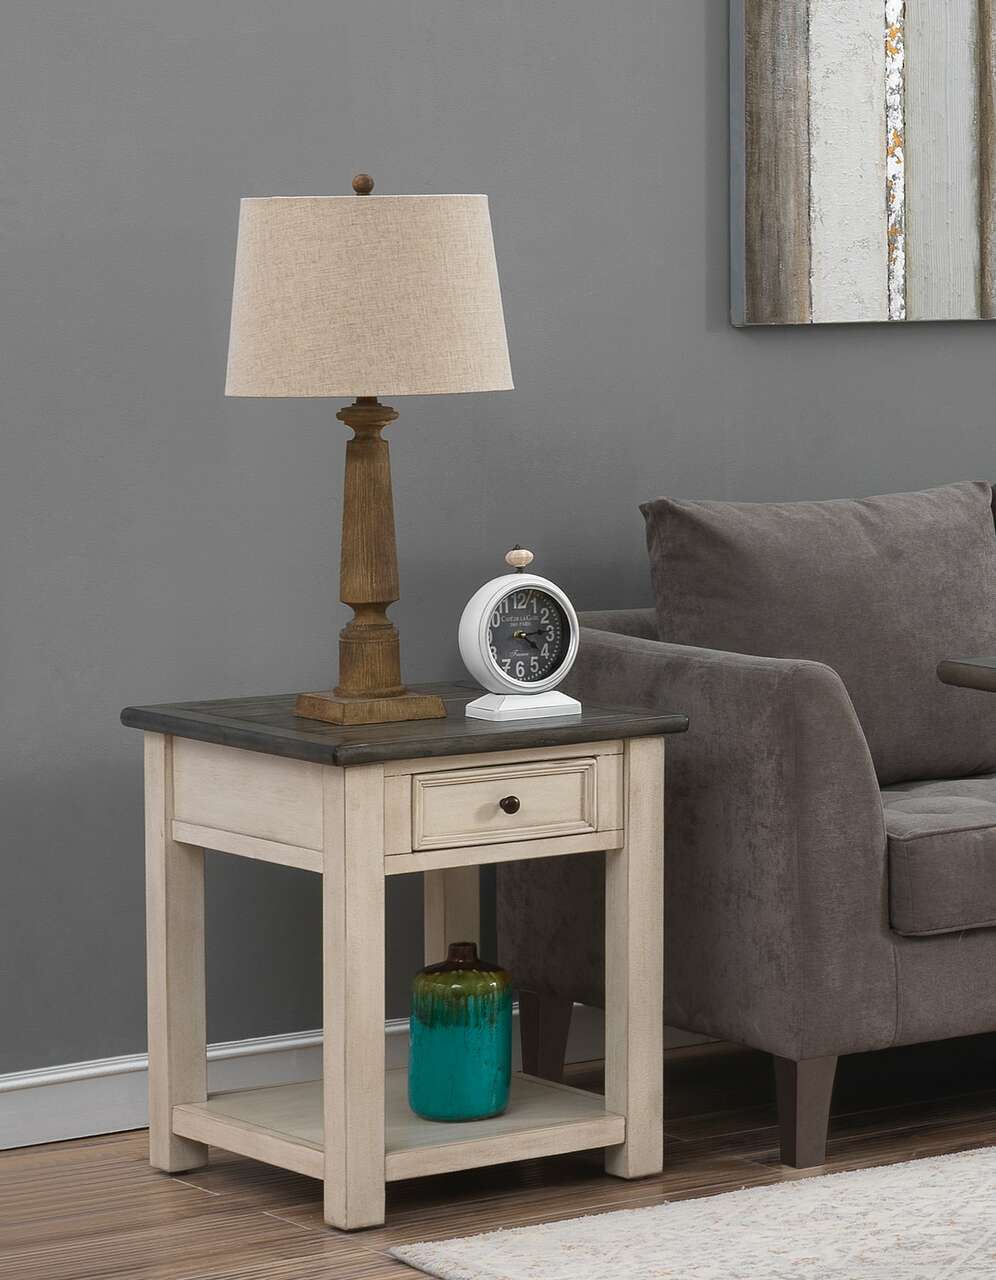 36537 End Table $410.99